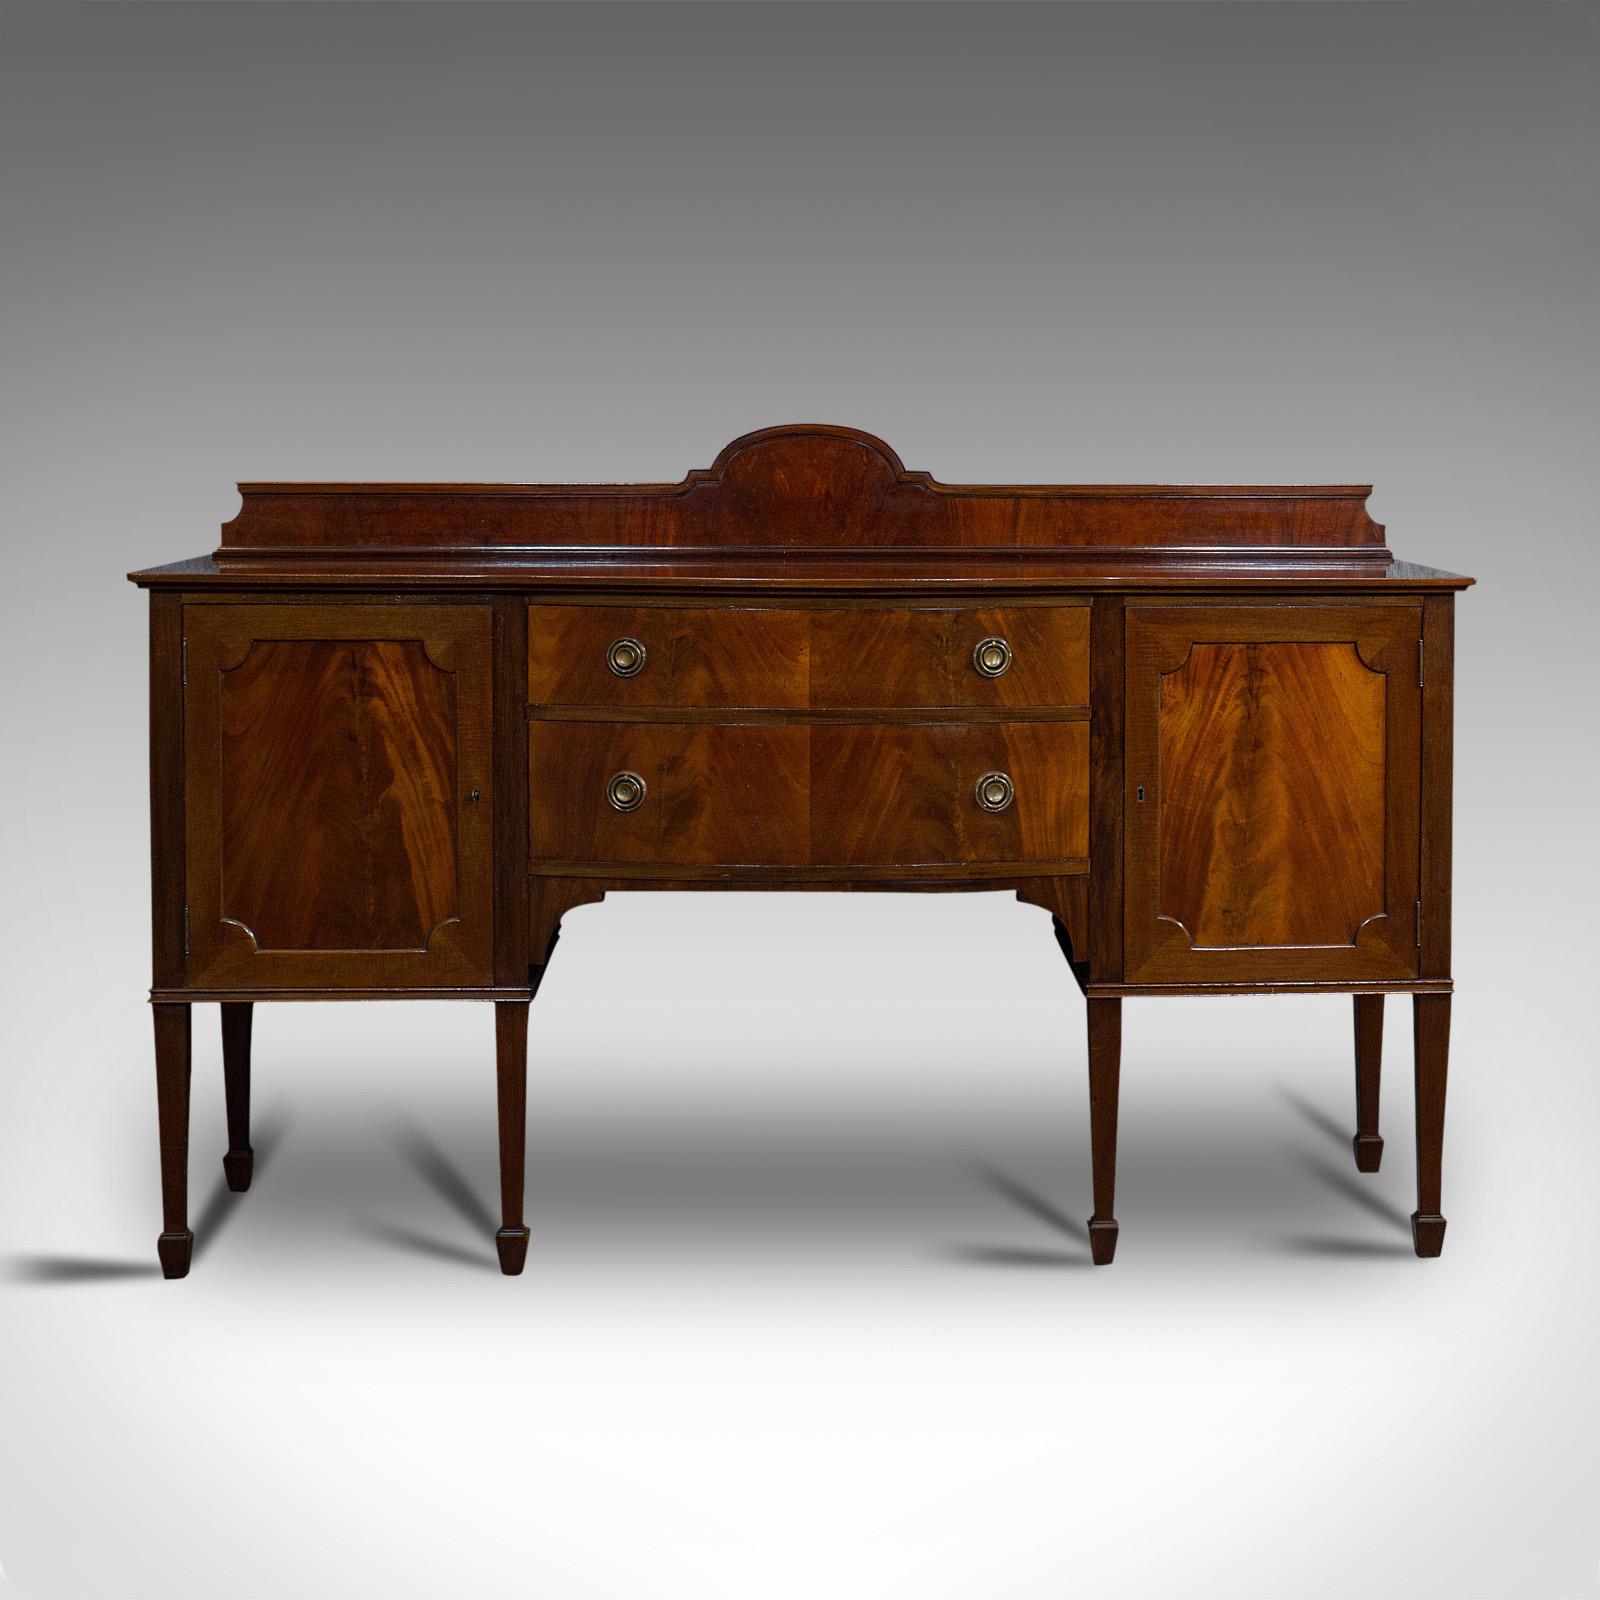 This is an antique bow front sideboard. An English, mahogany dresser cabinet, dating to the Victorian period, circa 1880.

Superb Victorian appeal
Displays a desirable aged patina
Presenting quality mahogany with fine grain interest
Rich russet